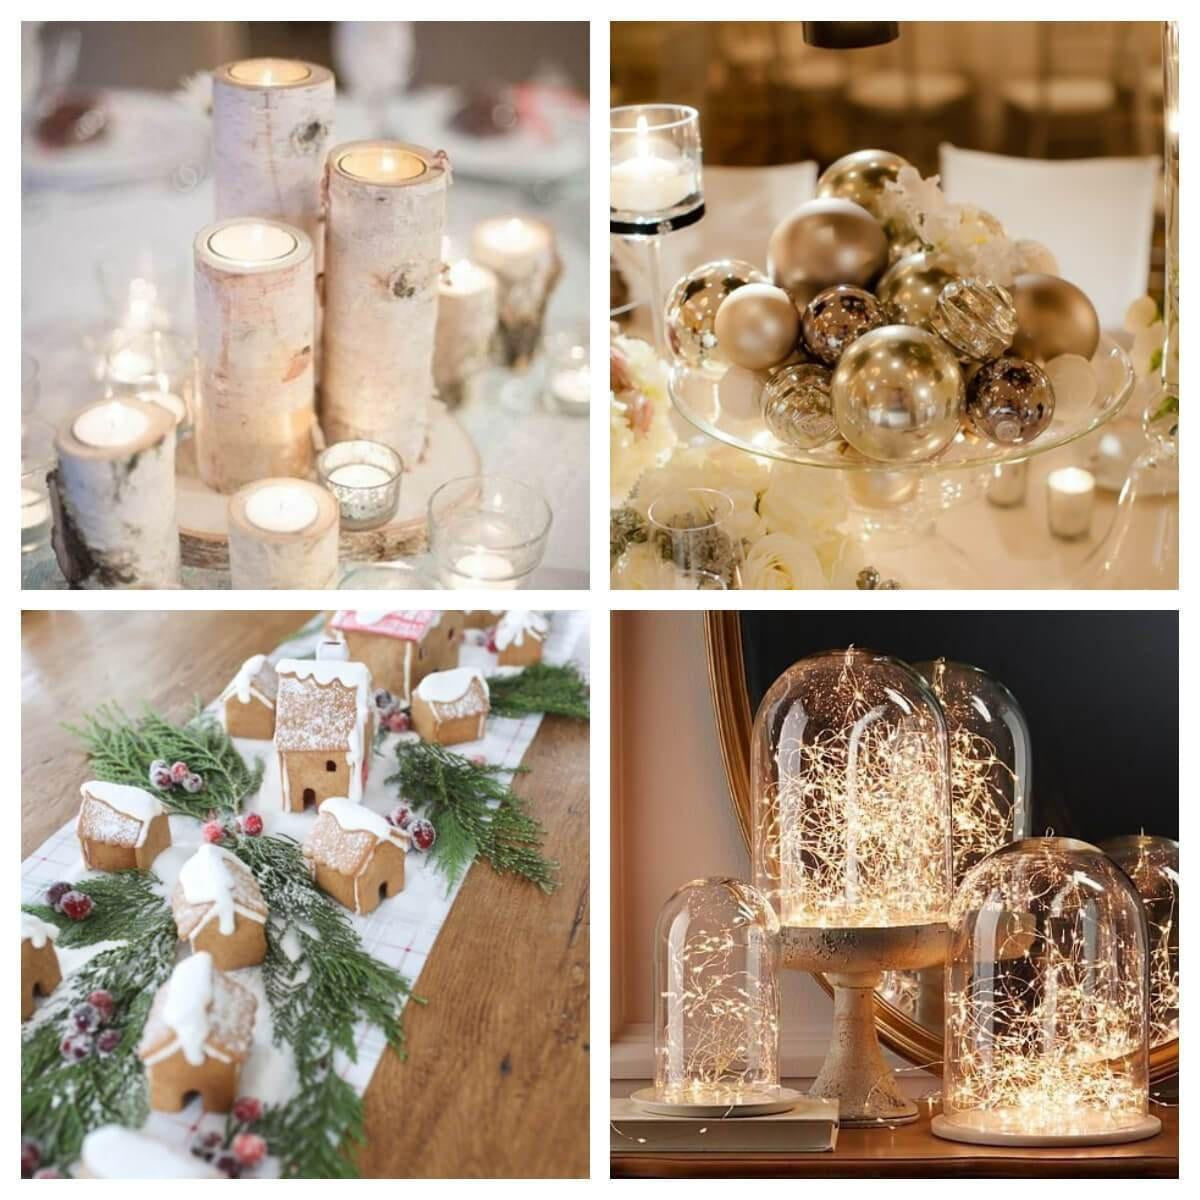 10 Winter Wedding Centerpieces Without Flowers-Koyal Wholesale